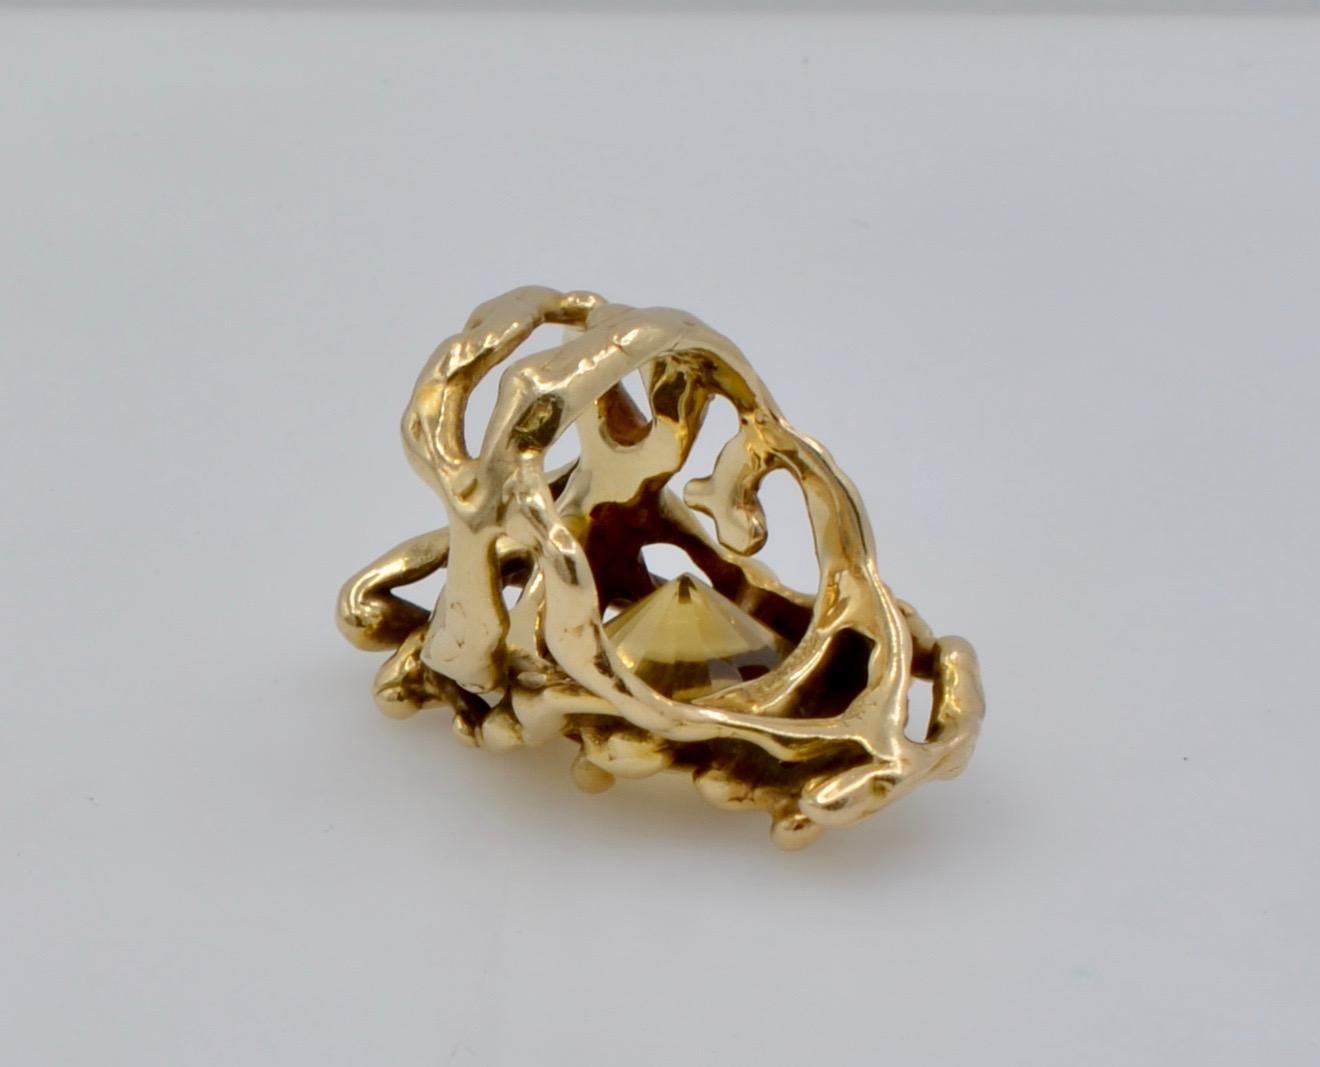 This amazing organic ring was designed and made by the Monterey, California Designer Dorian Grabowski. The 7.25 ct citrine is set in 14k gold freeform branches that intertwine with three dimensional movement . The many tendrils of the beaches